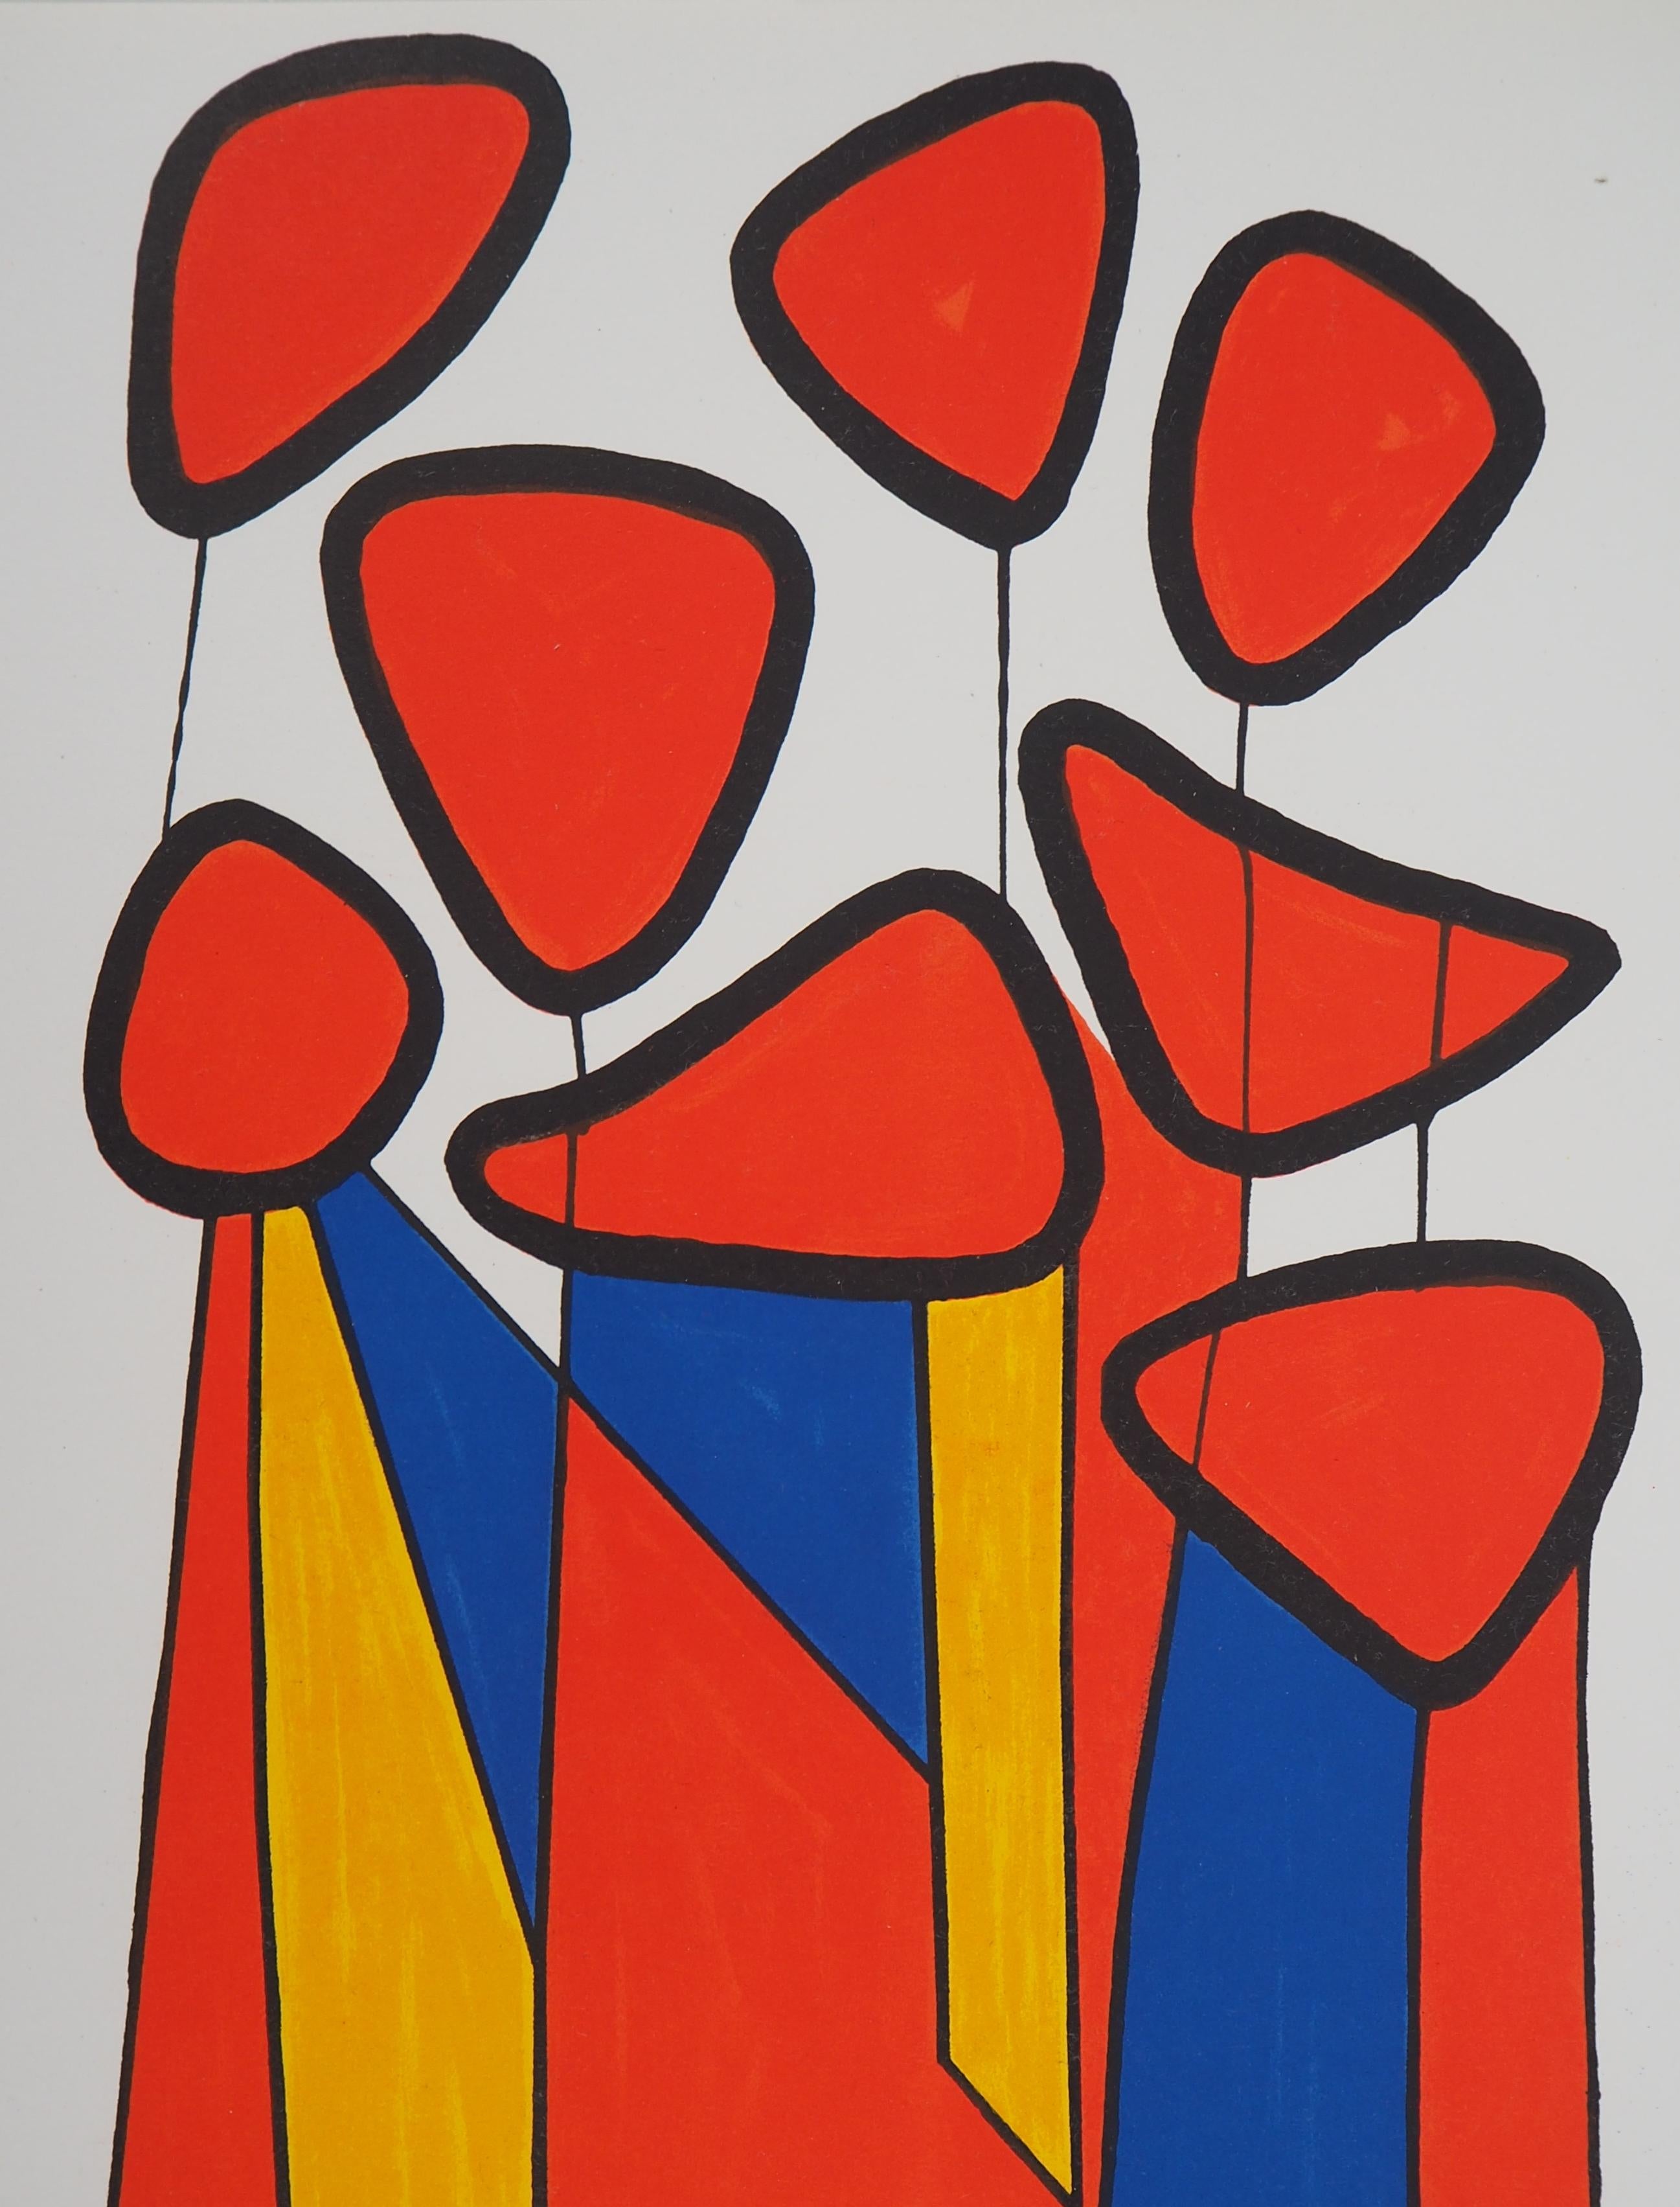 Composition in Red, Yellow and Blue - lithograph - Mourlot, 1972 - Print by Alexander Calder